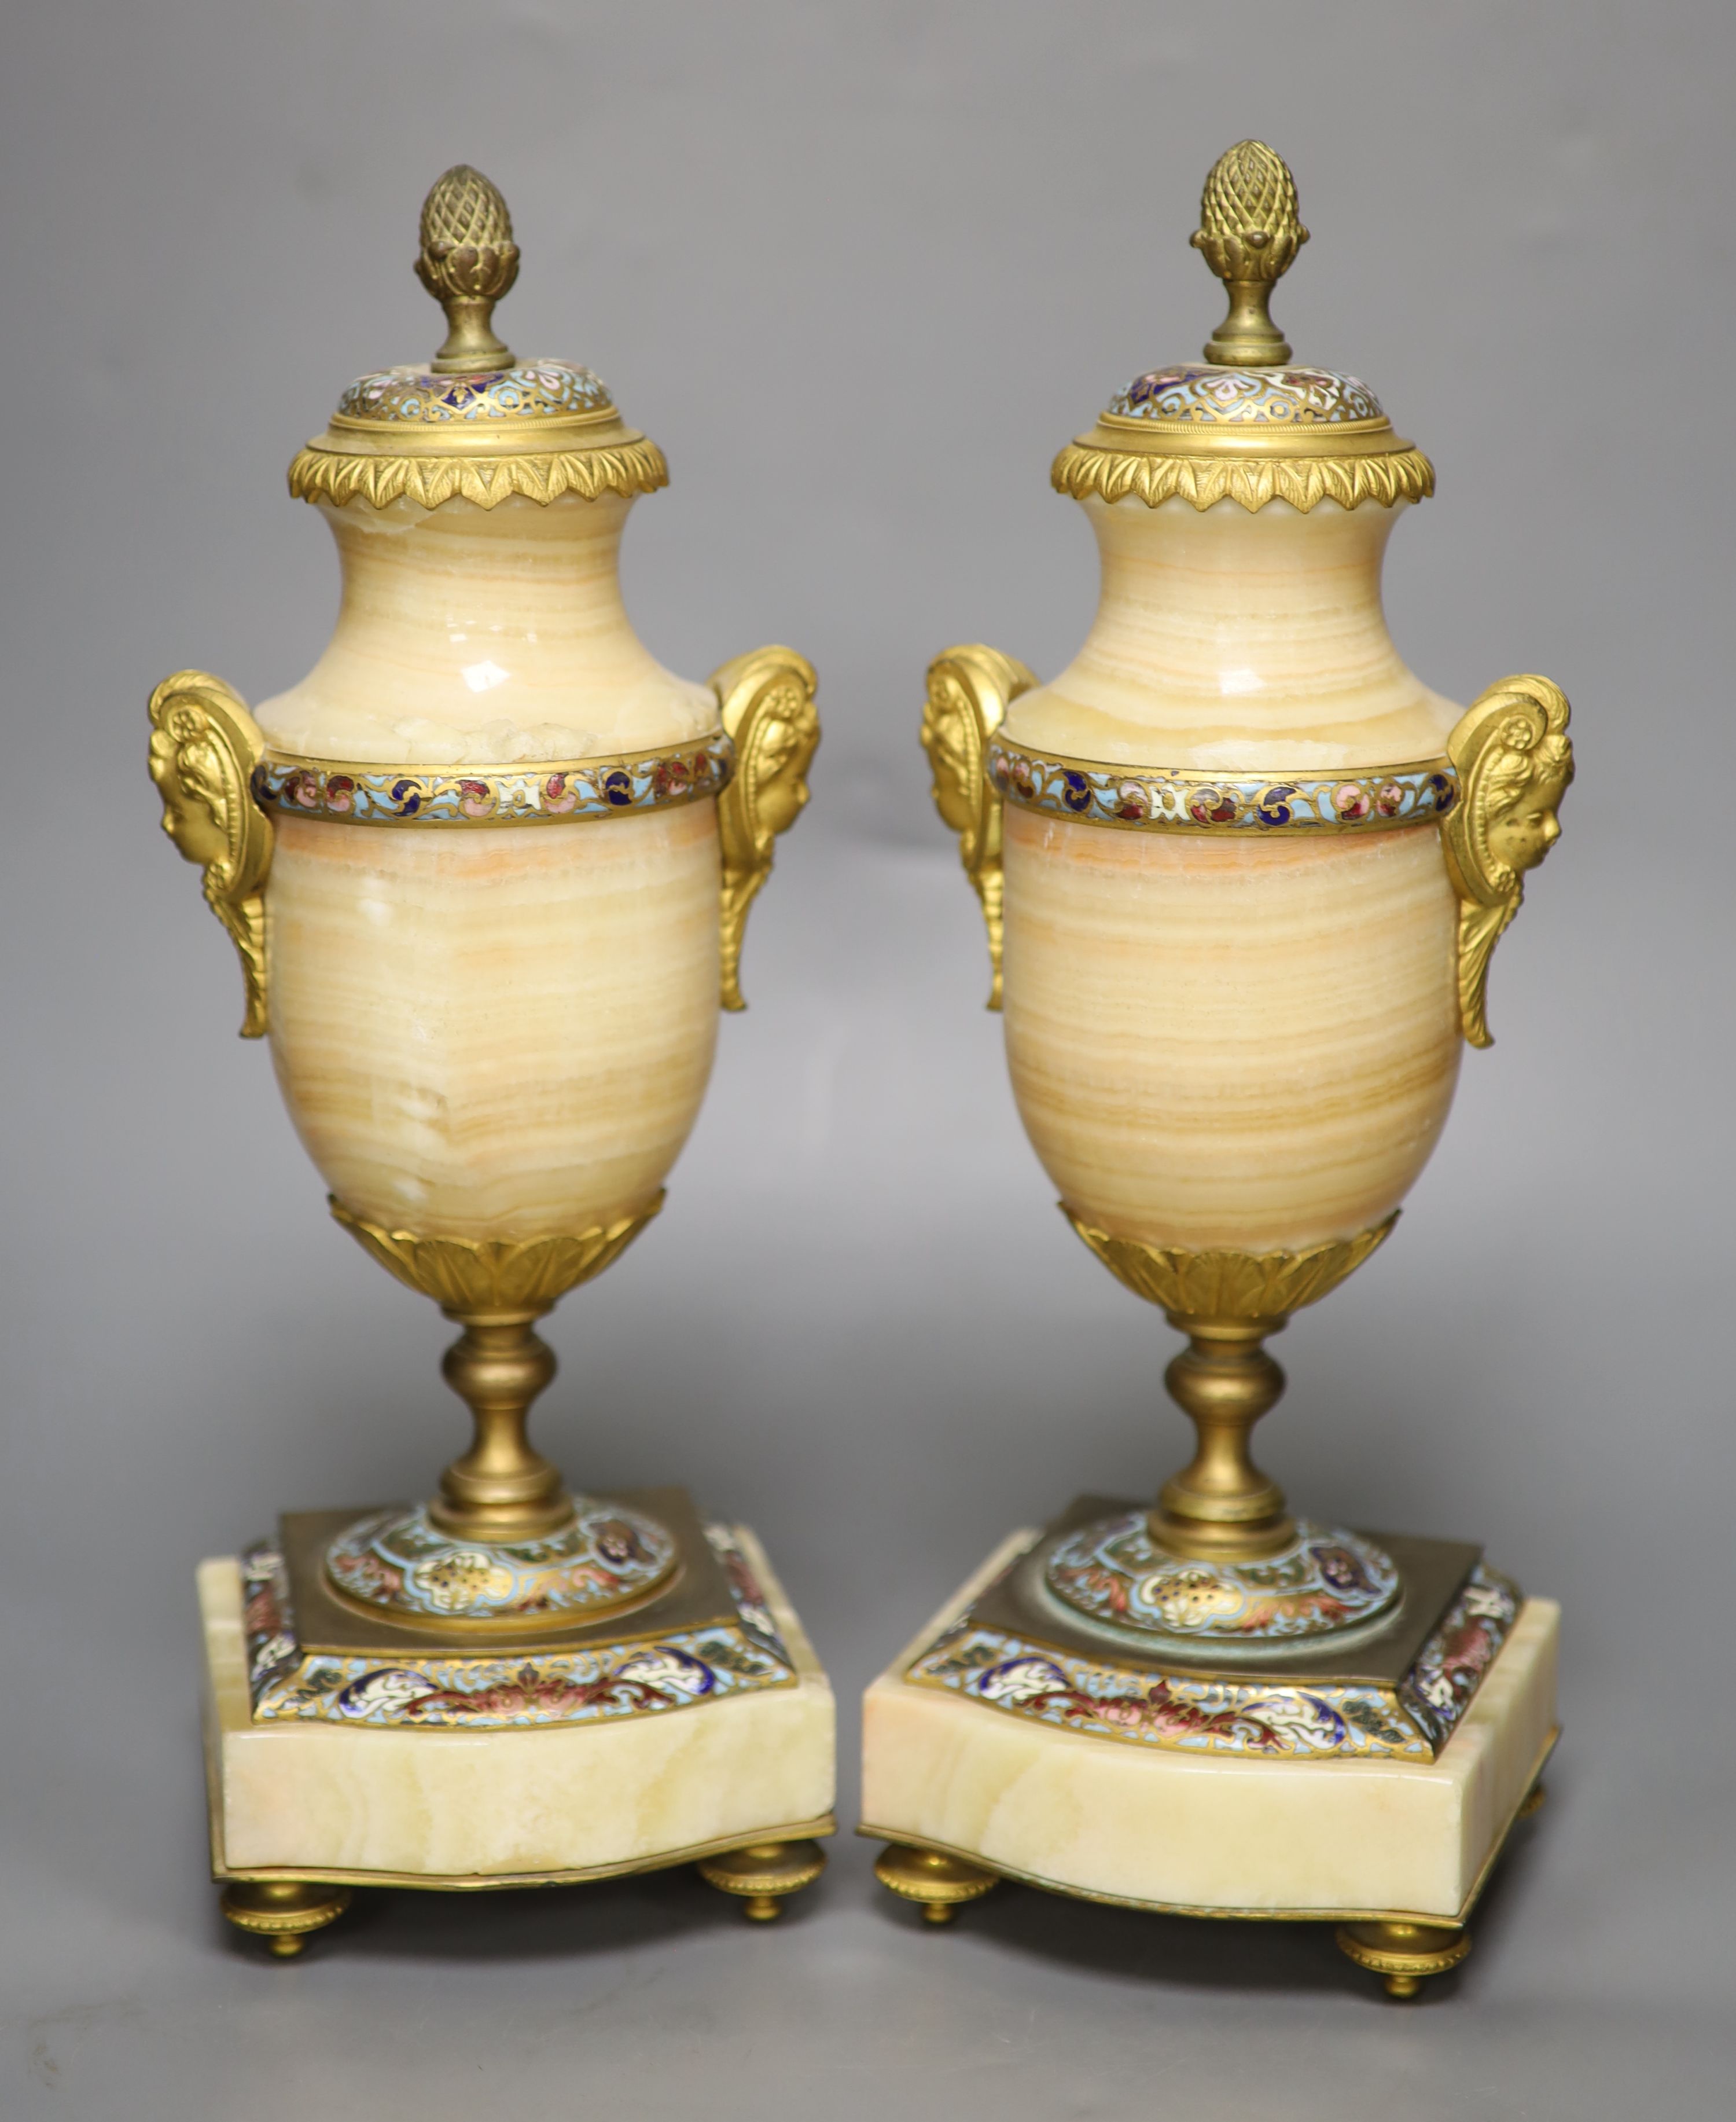 A pair of late 19th century alabaster and champleve enamel urns (formerly part of a clock garniture), height 32cm